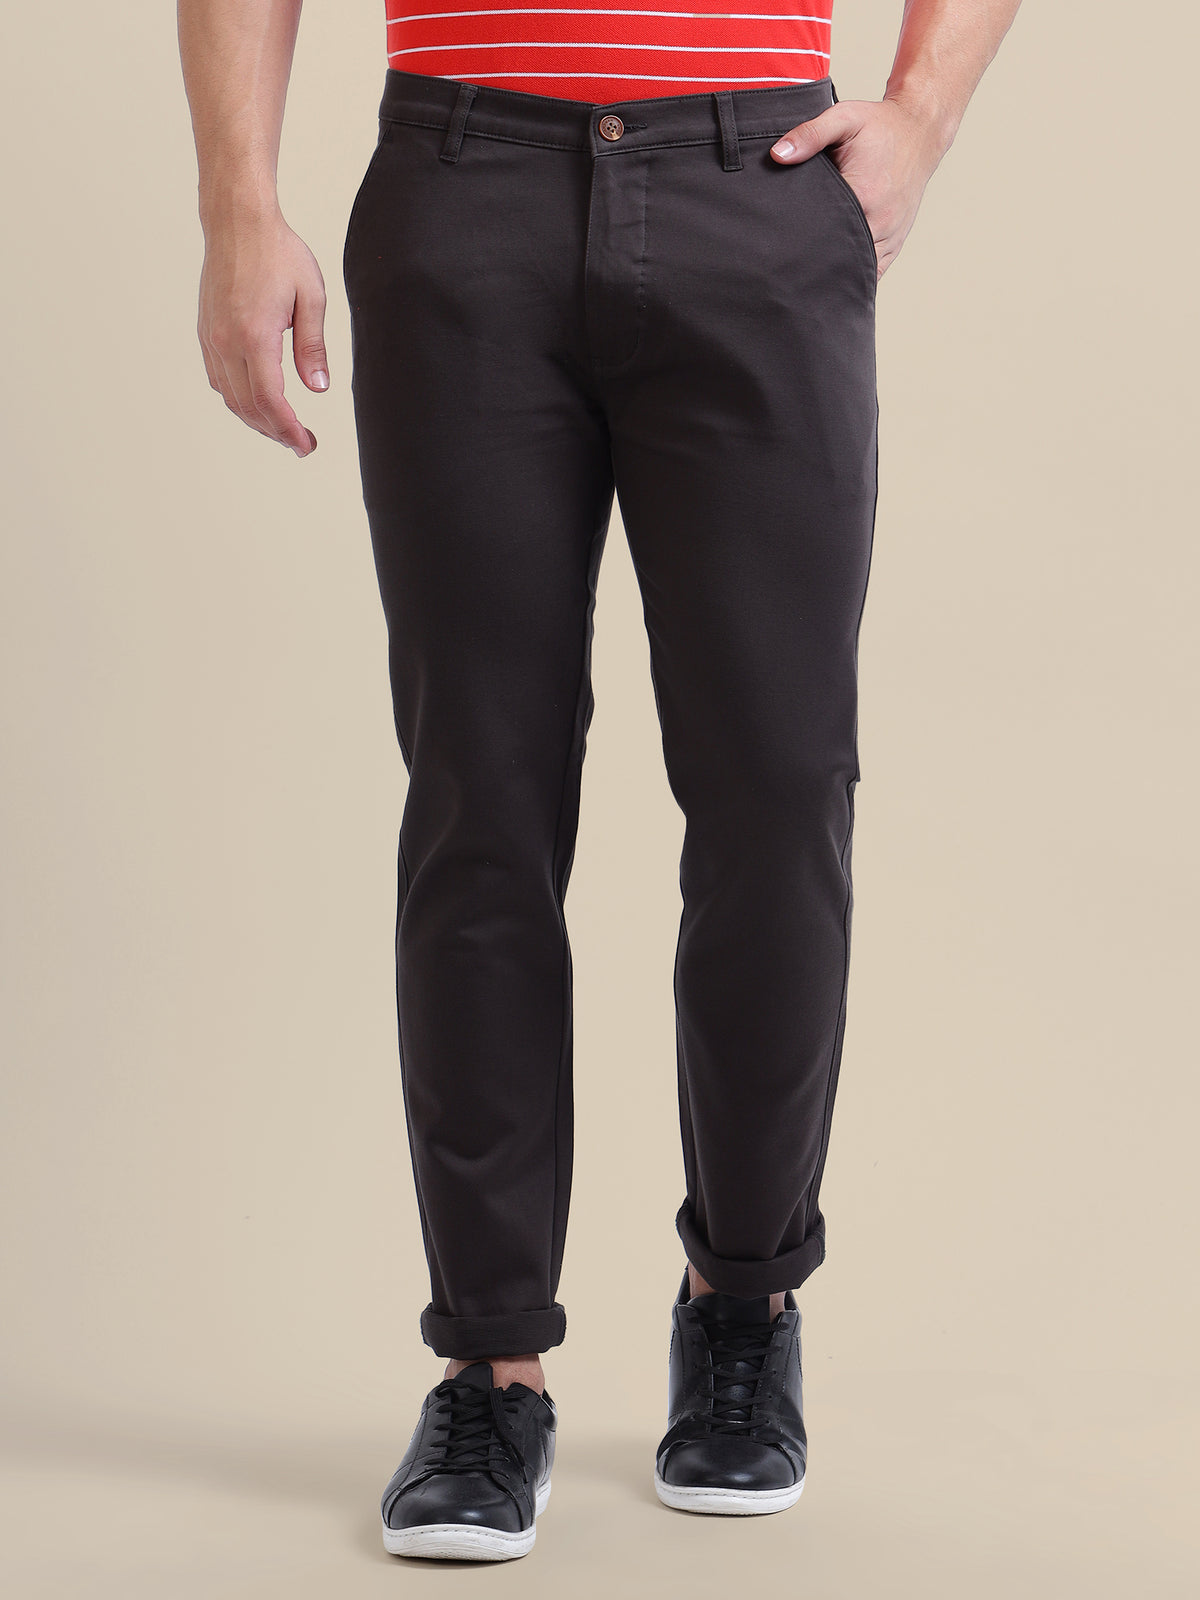 Black  Casual Trousers Solid Cotton Lycra Smart Fit